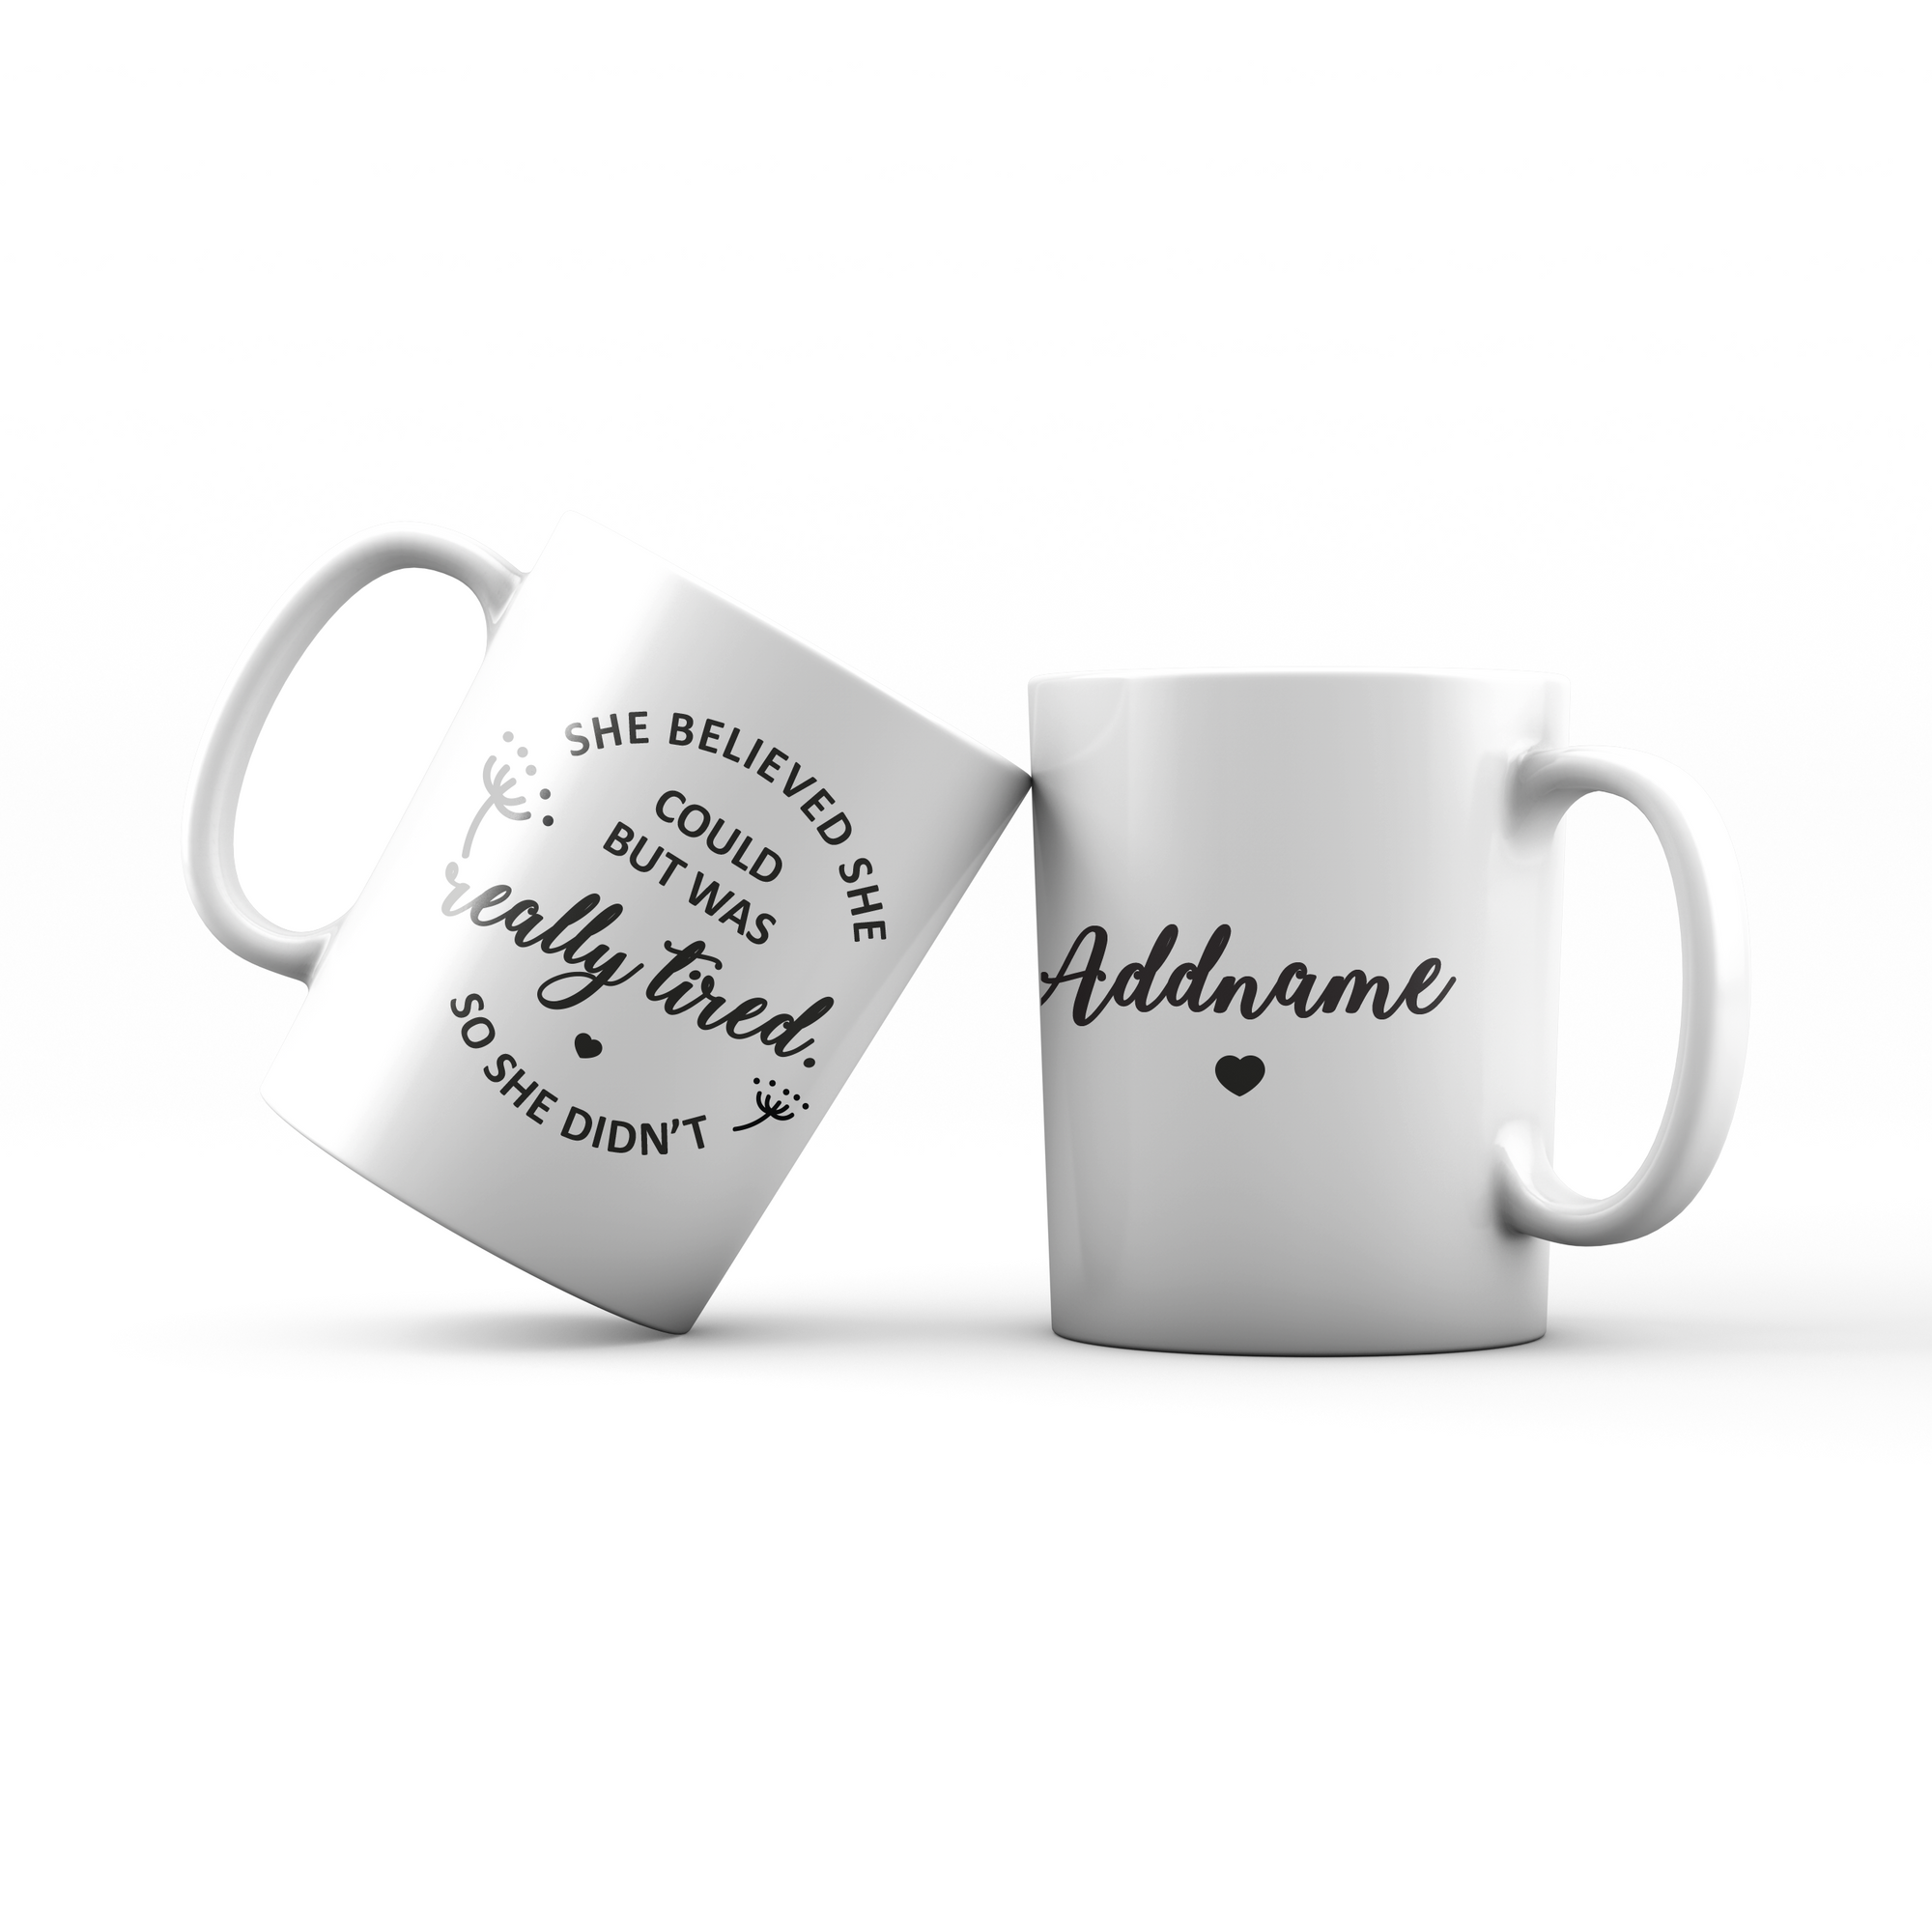 Funny Mom Quotes She Believed She Could But Was Really Tired So She Didnt Addname Mug